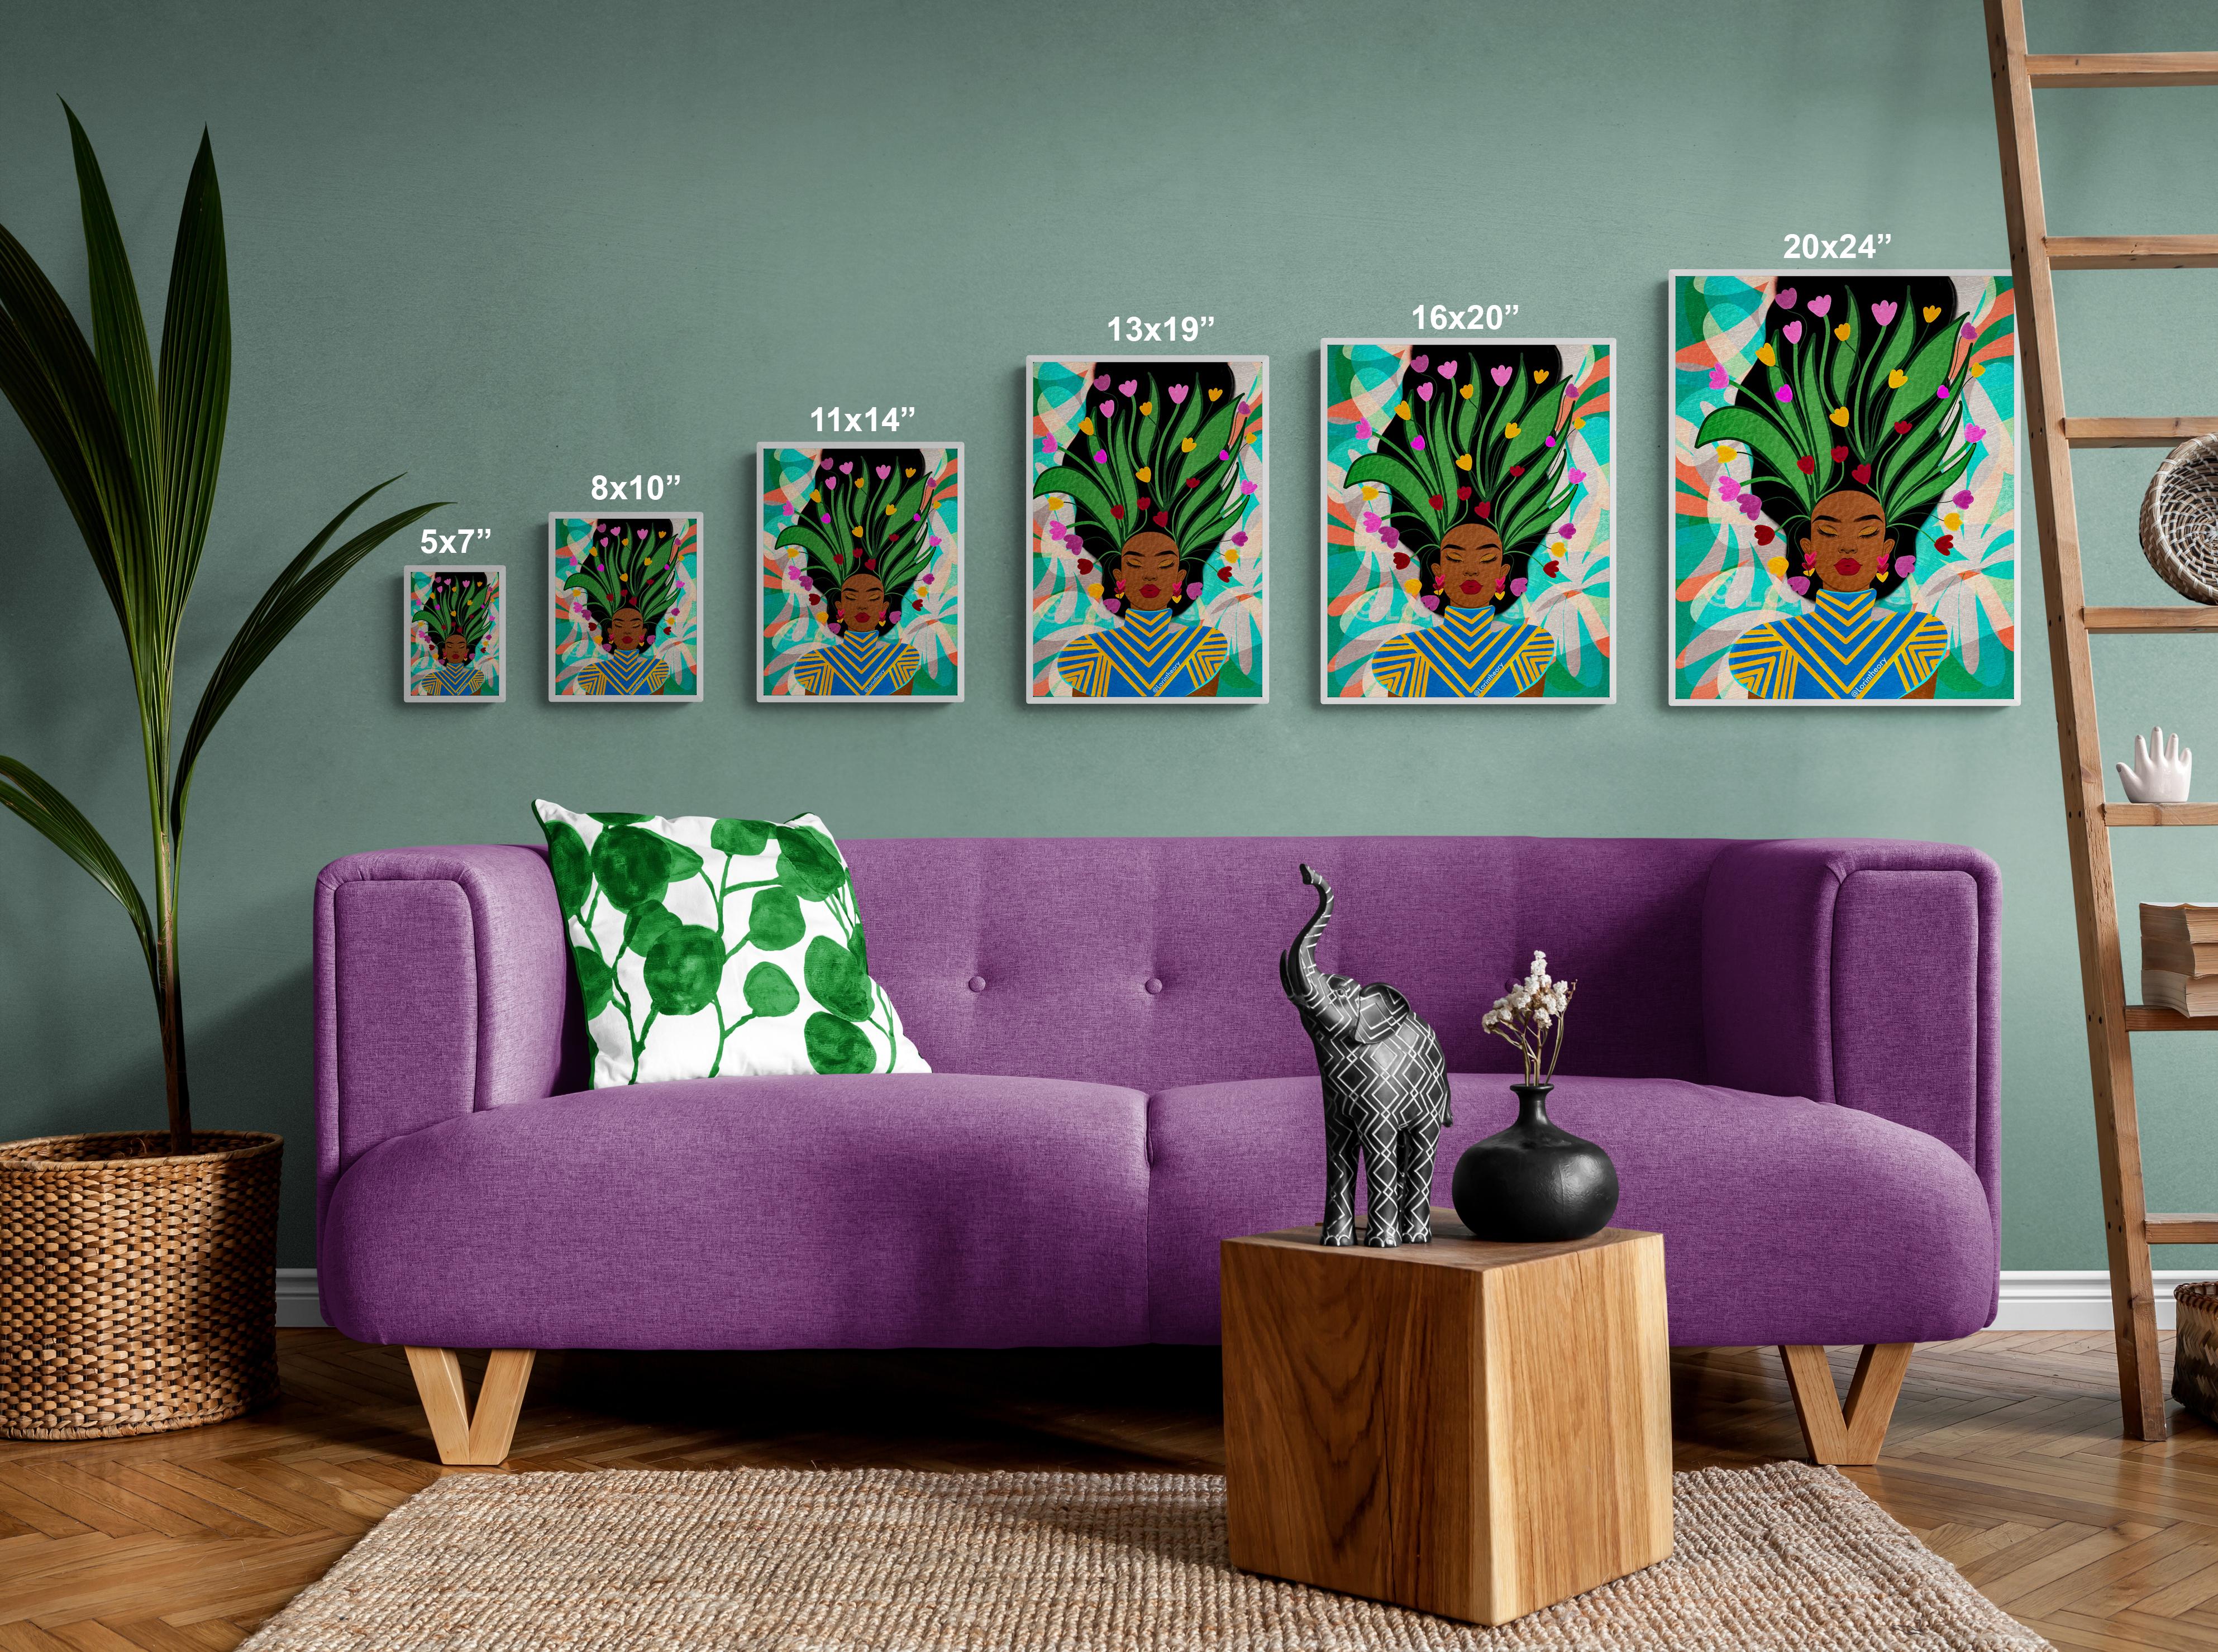 Afro Contemporary Wall Art Size Guide